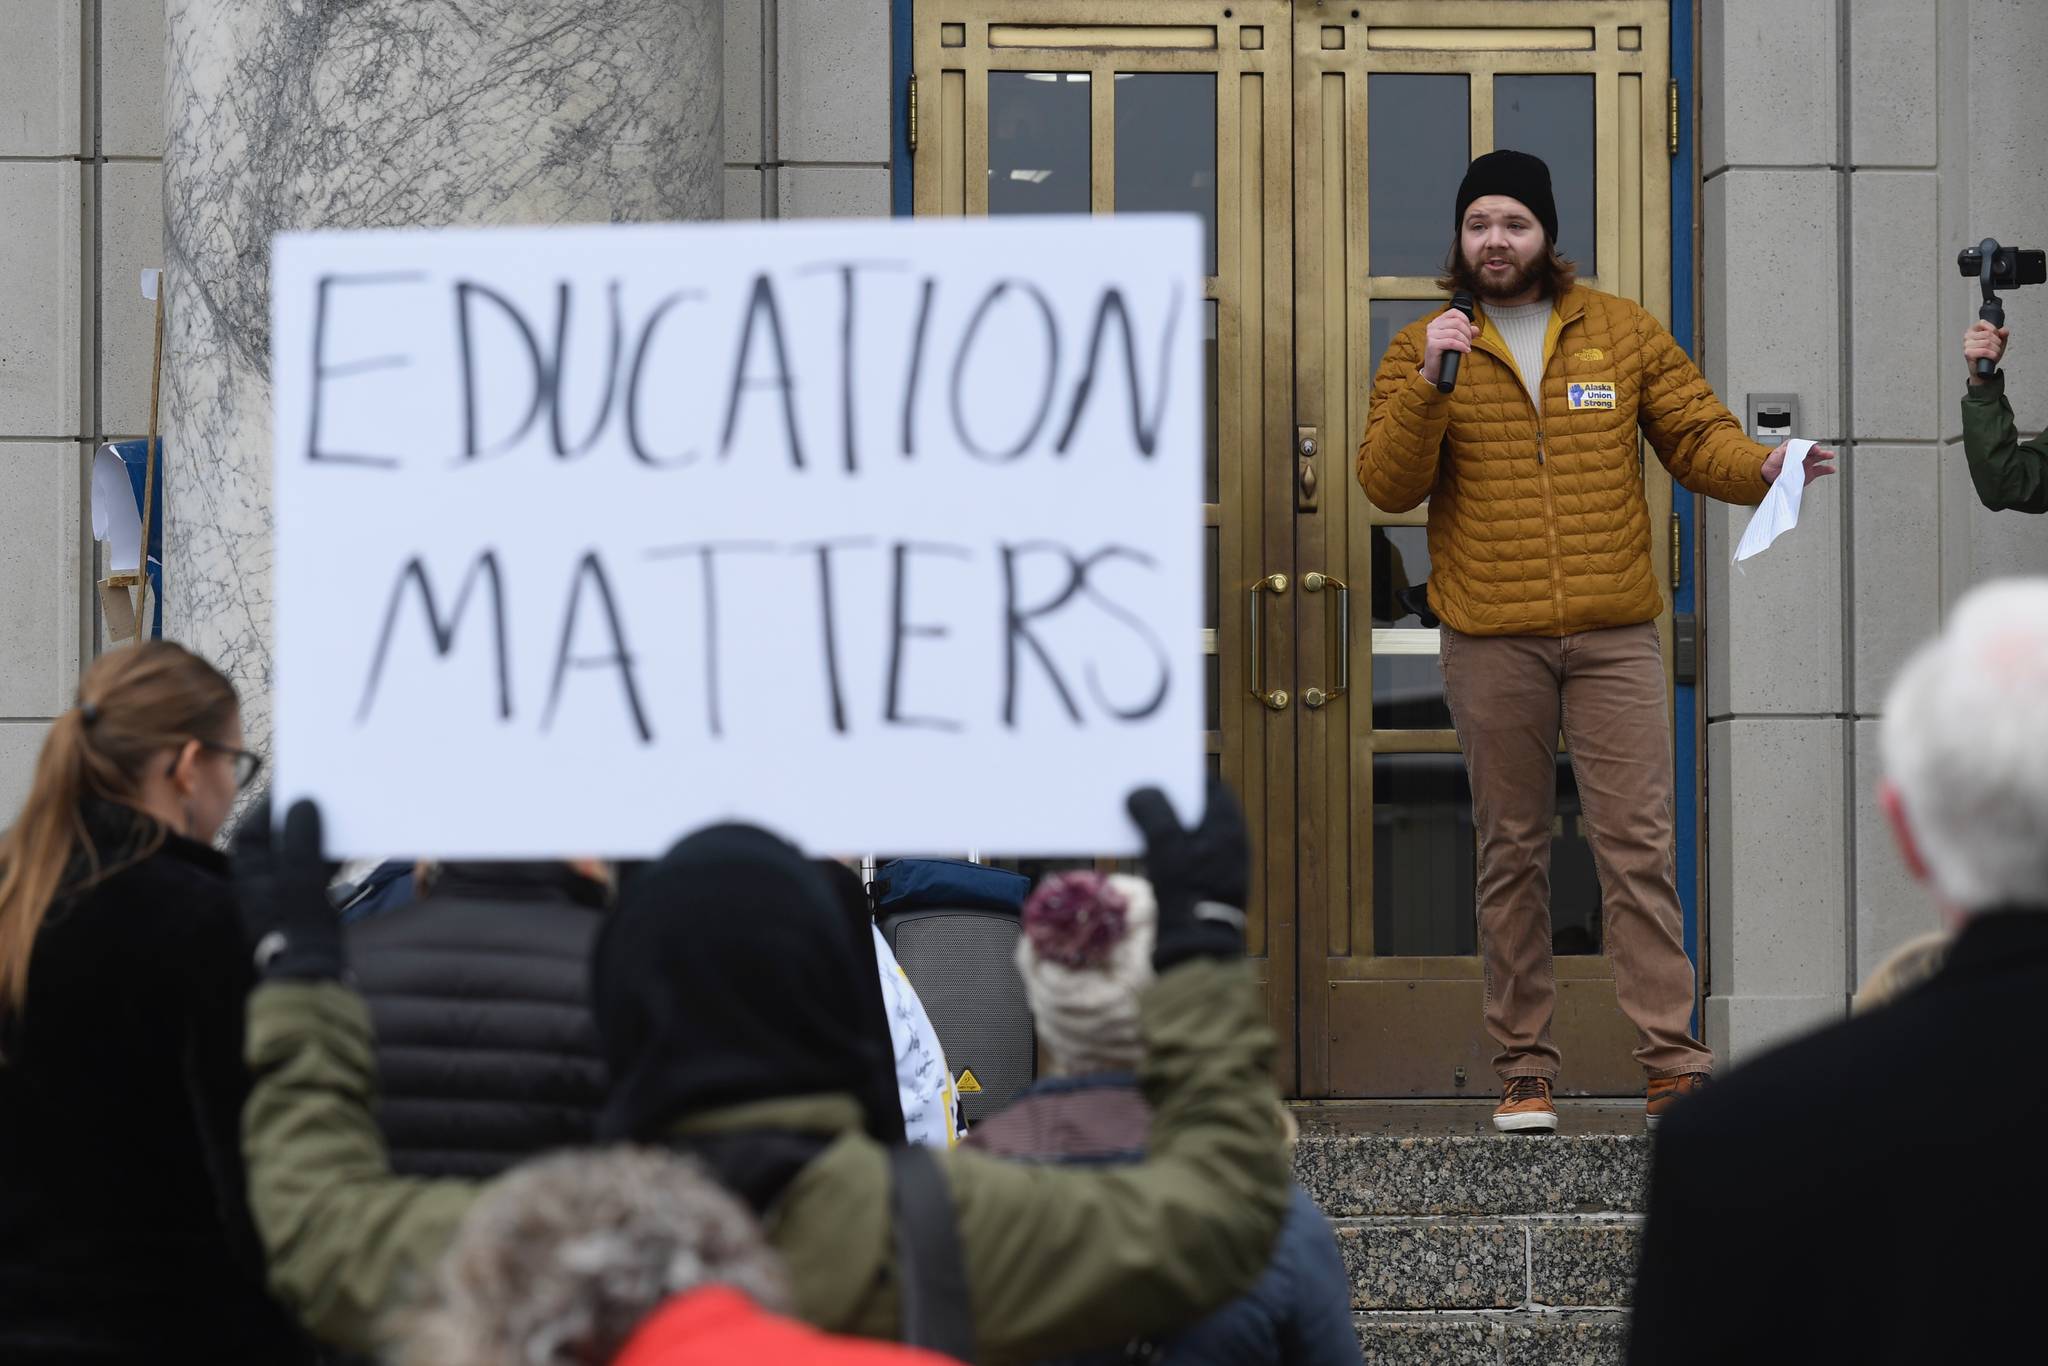 UAS Student Body President Nick Bursell speaks at a rally for funding the University of Alaska in front of the Capitol on Wednesday, Feb. 13, 2019. (Michael Penn | Juneau Empire)